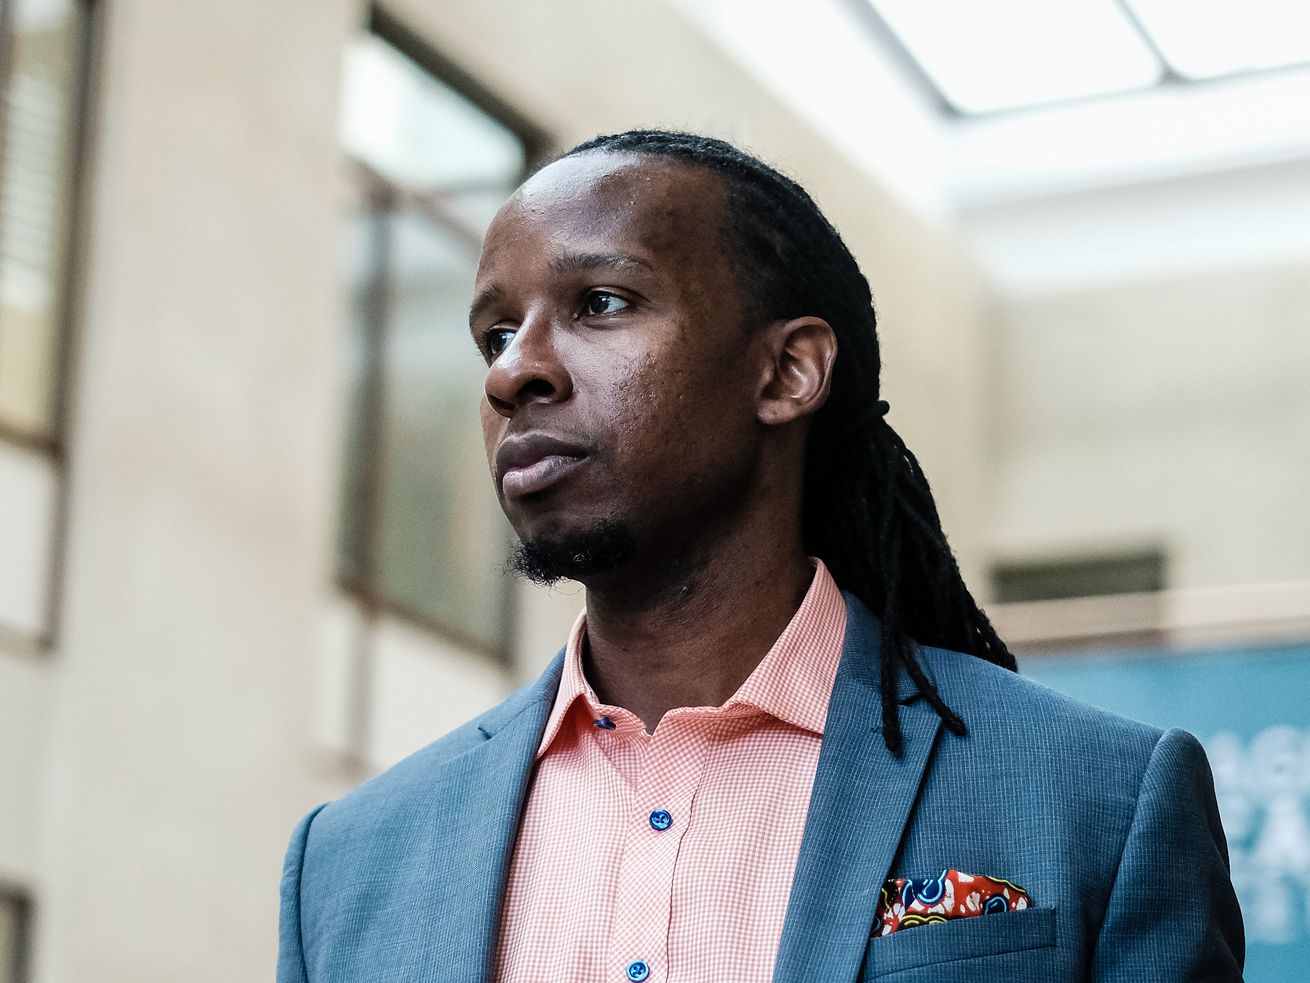 Ibram X. Kendi on anti-racism, Juneteenth, and the reckoning that wasn’t